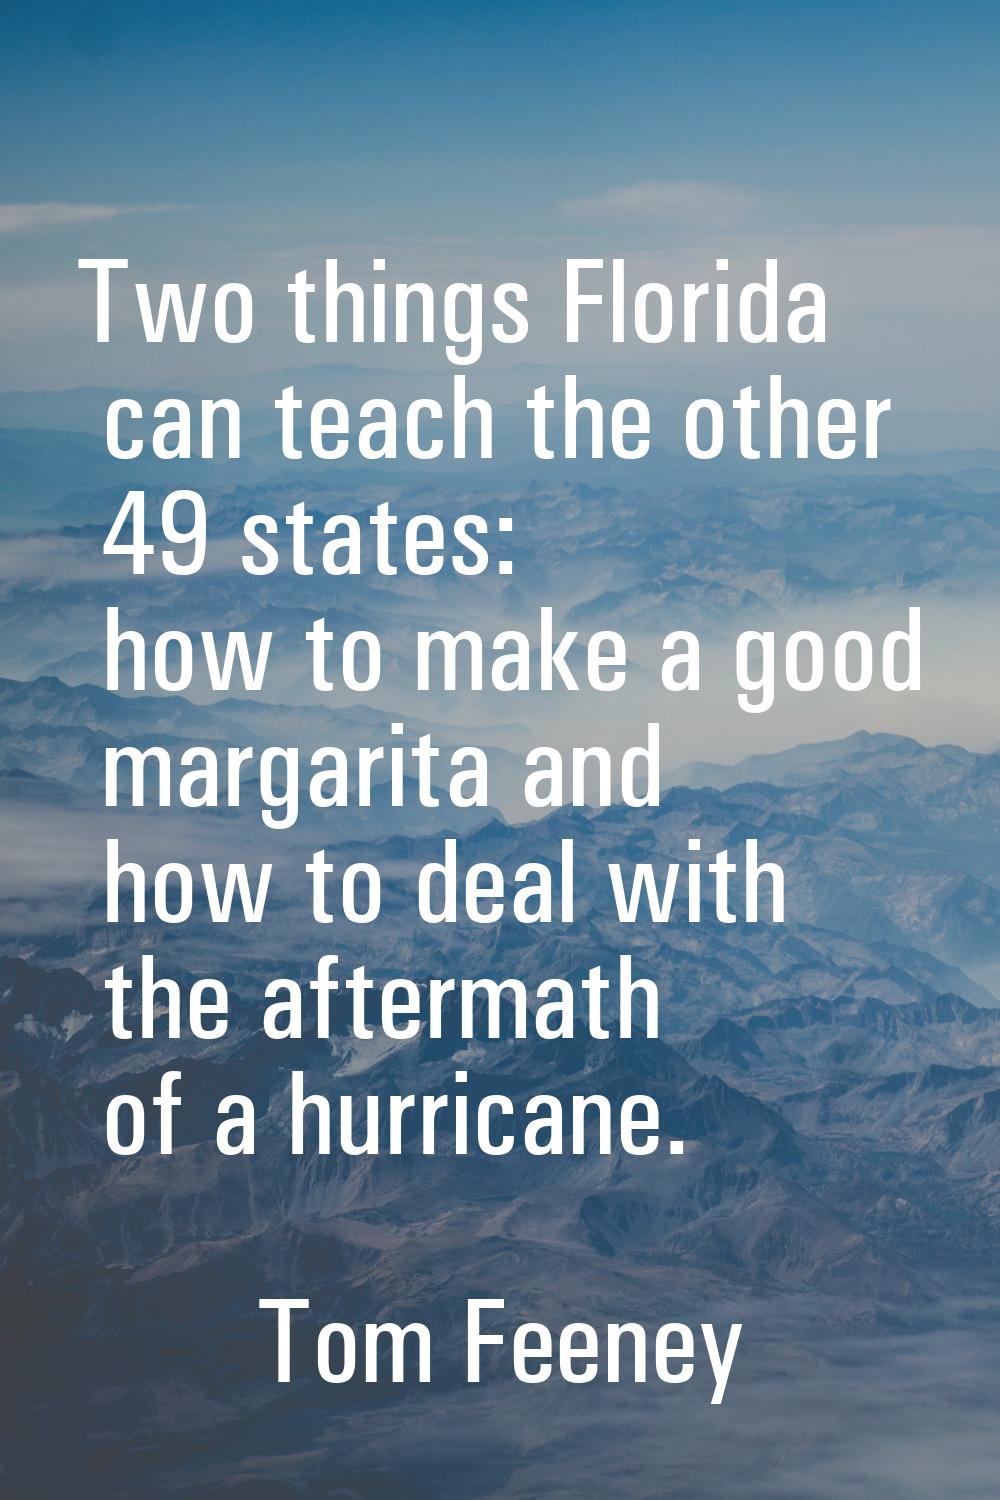 Two things Florida can teach the other 49 states: how to make a good margarita and how to deal with